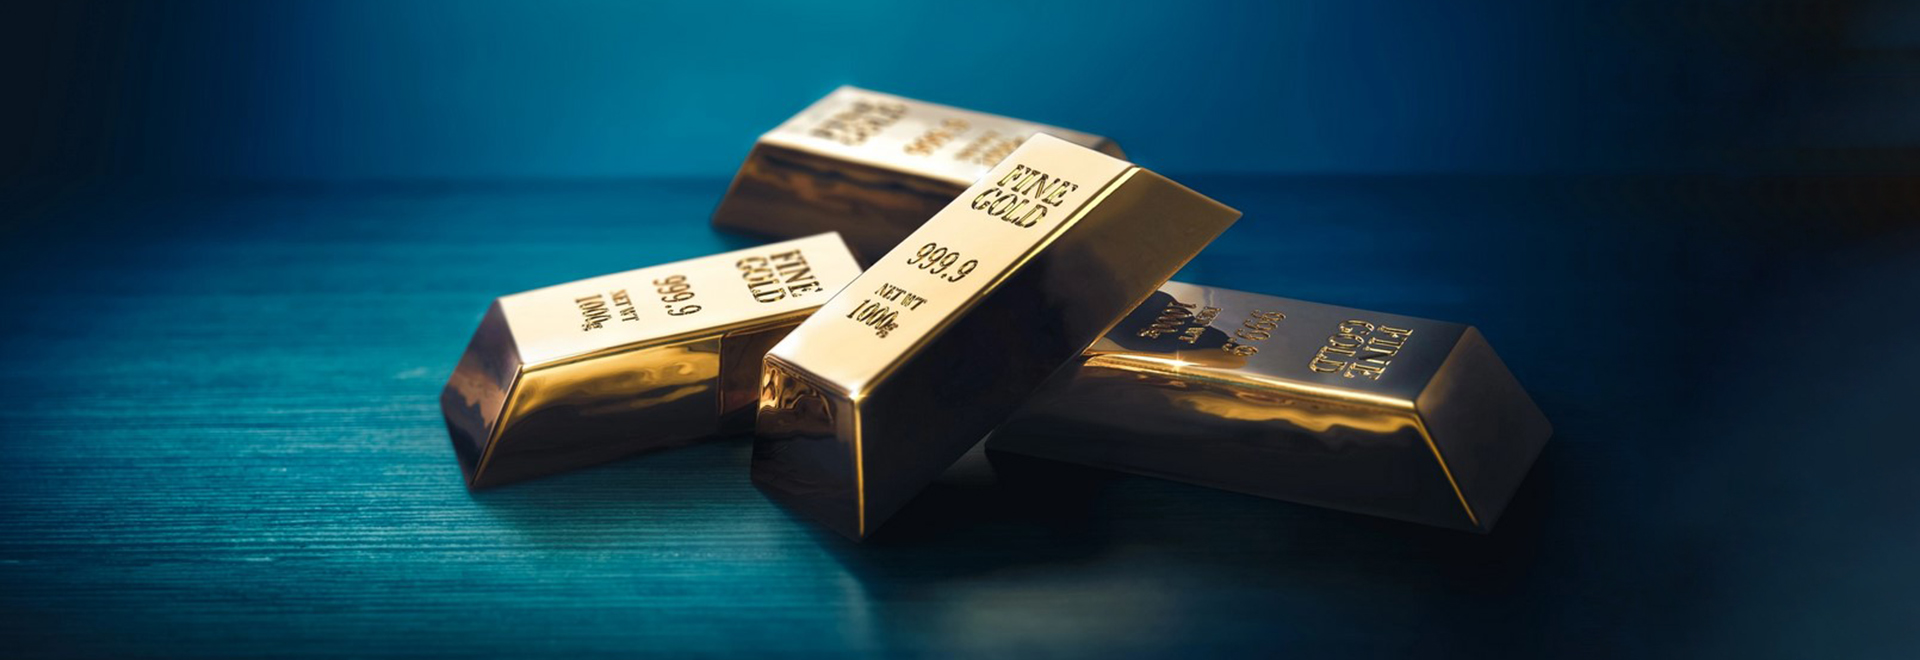 Gold Sixth Consecutive Session of Gains on Monday